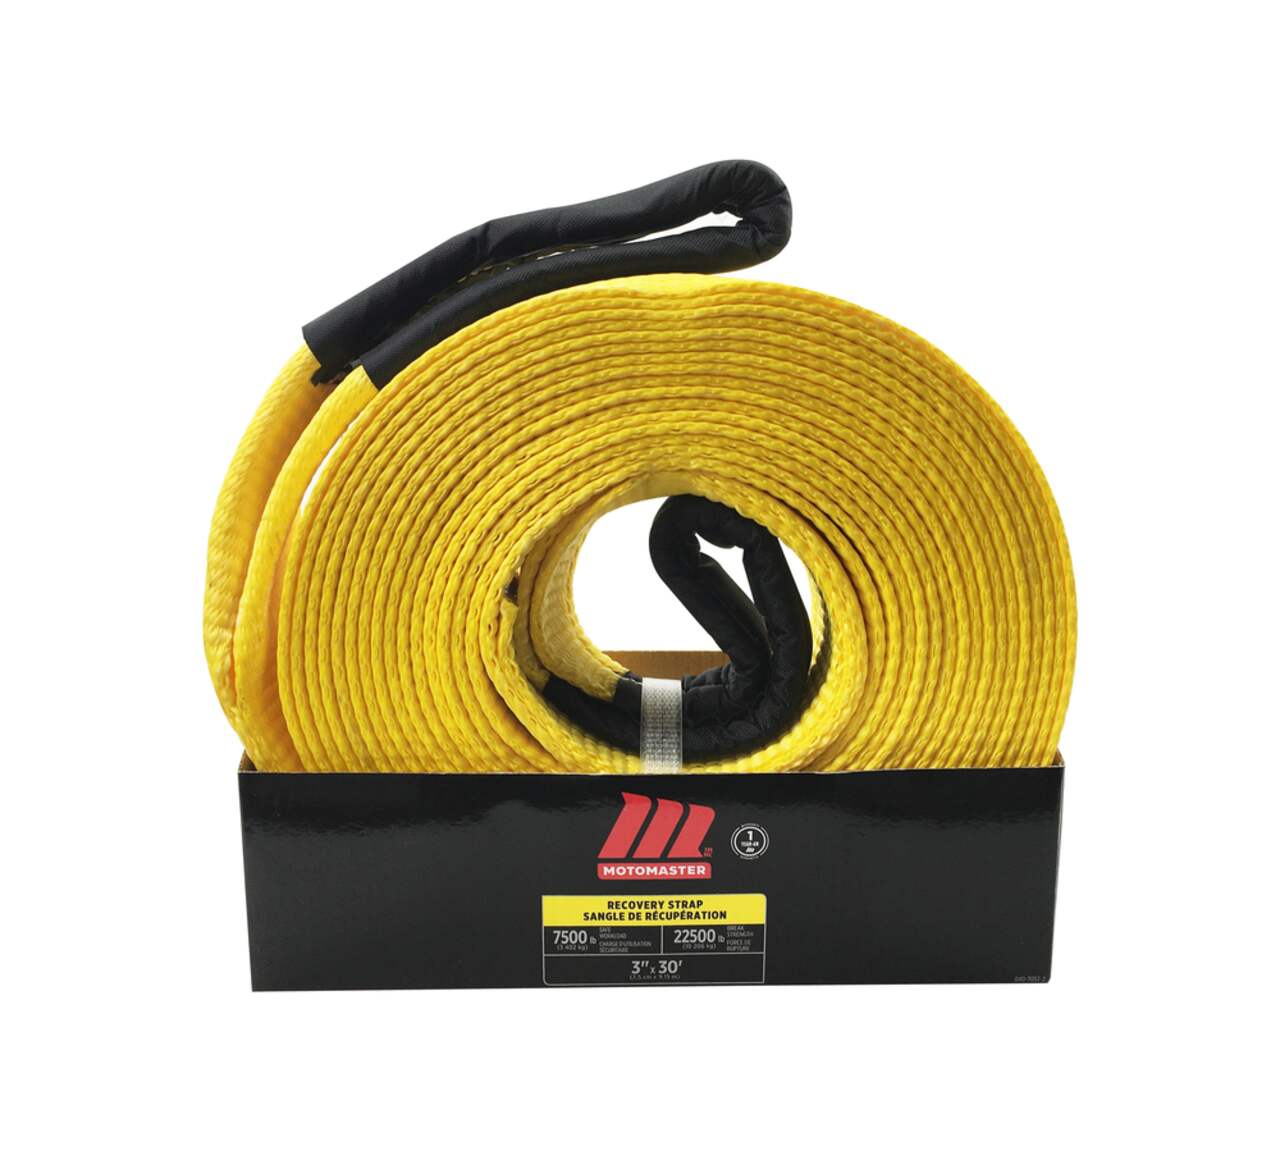 MotoMaster 22,500-lb Recovery Strap with Loop Ends, 3-in x 30-ft